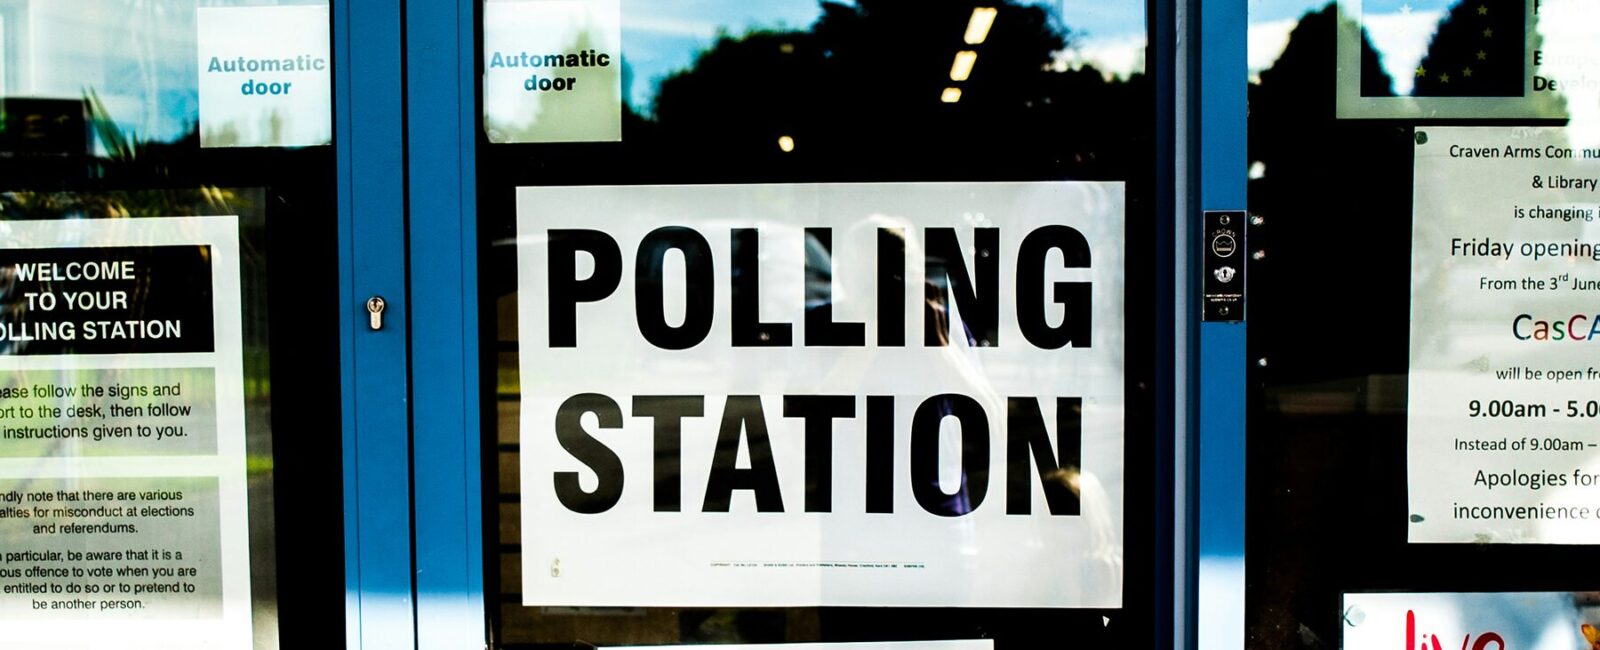 Polling station poster on clear glass door